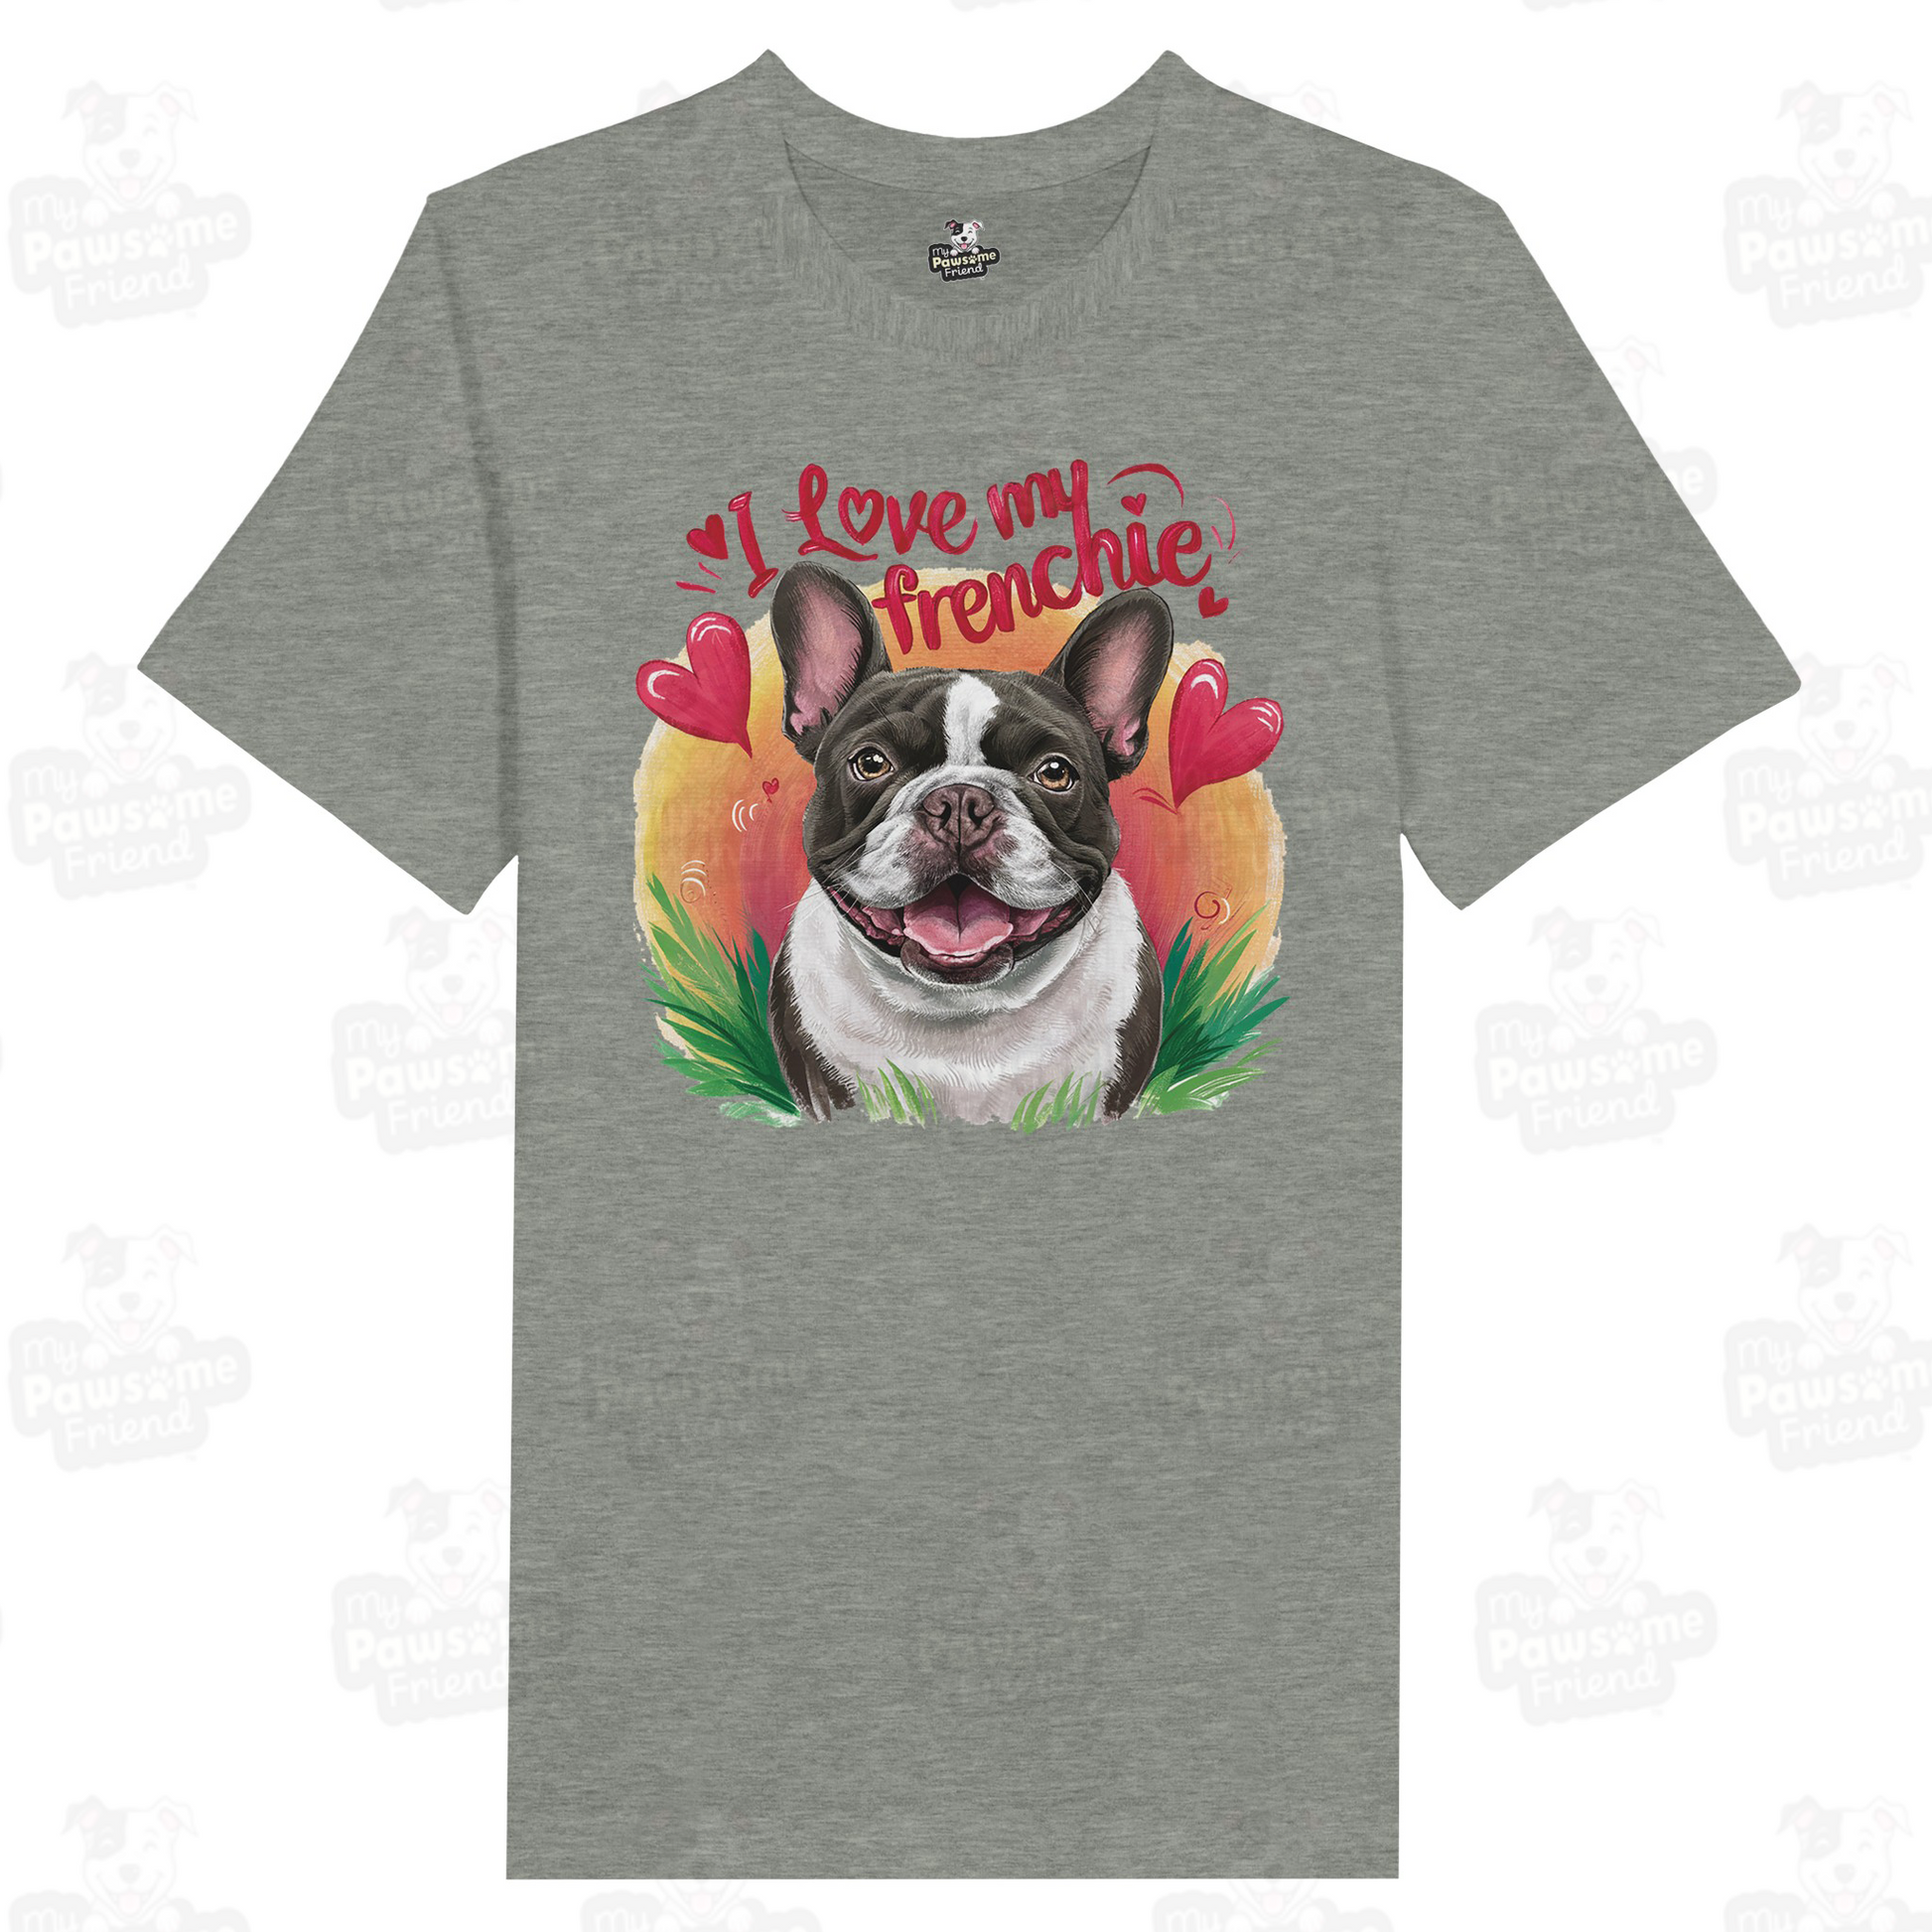 An unisex t shirt with a cute design featuring a french bulldog smiling surrounded by heart designs, and the phrase "I love my Frenchie". The color of the unisex t shirt is athletic heather or grey